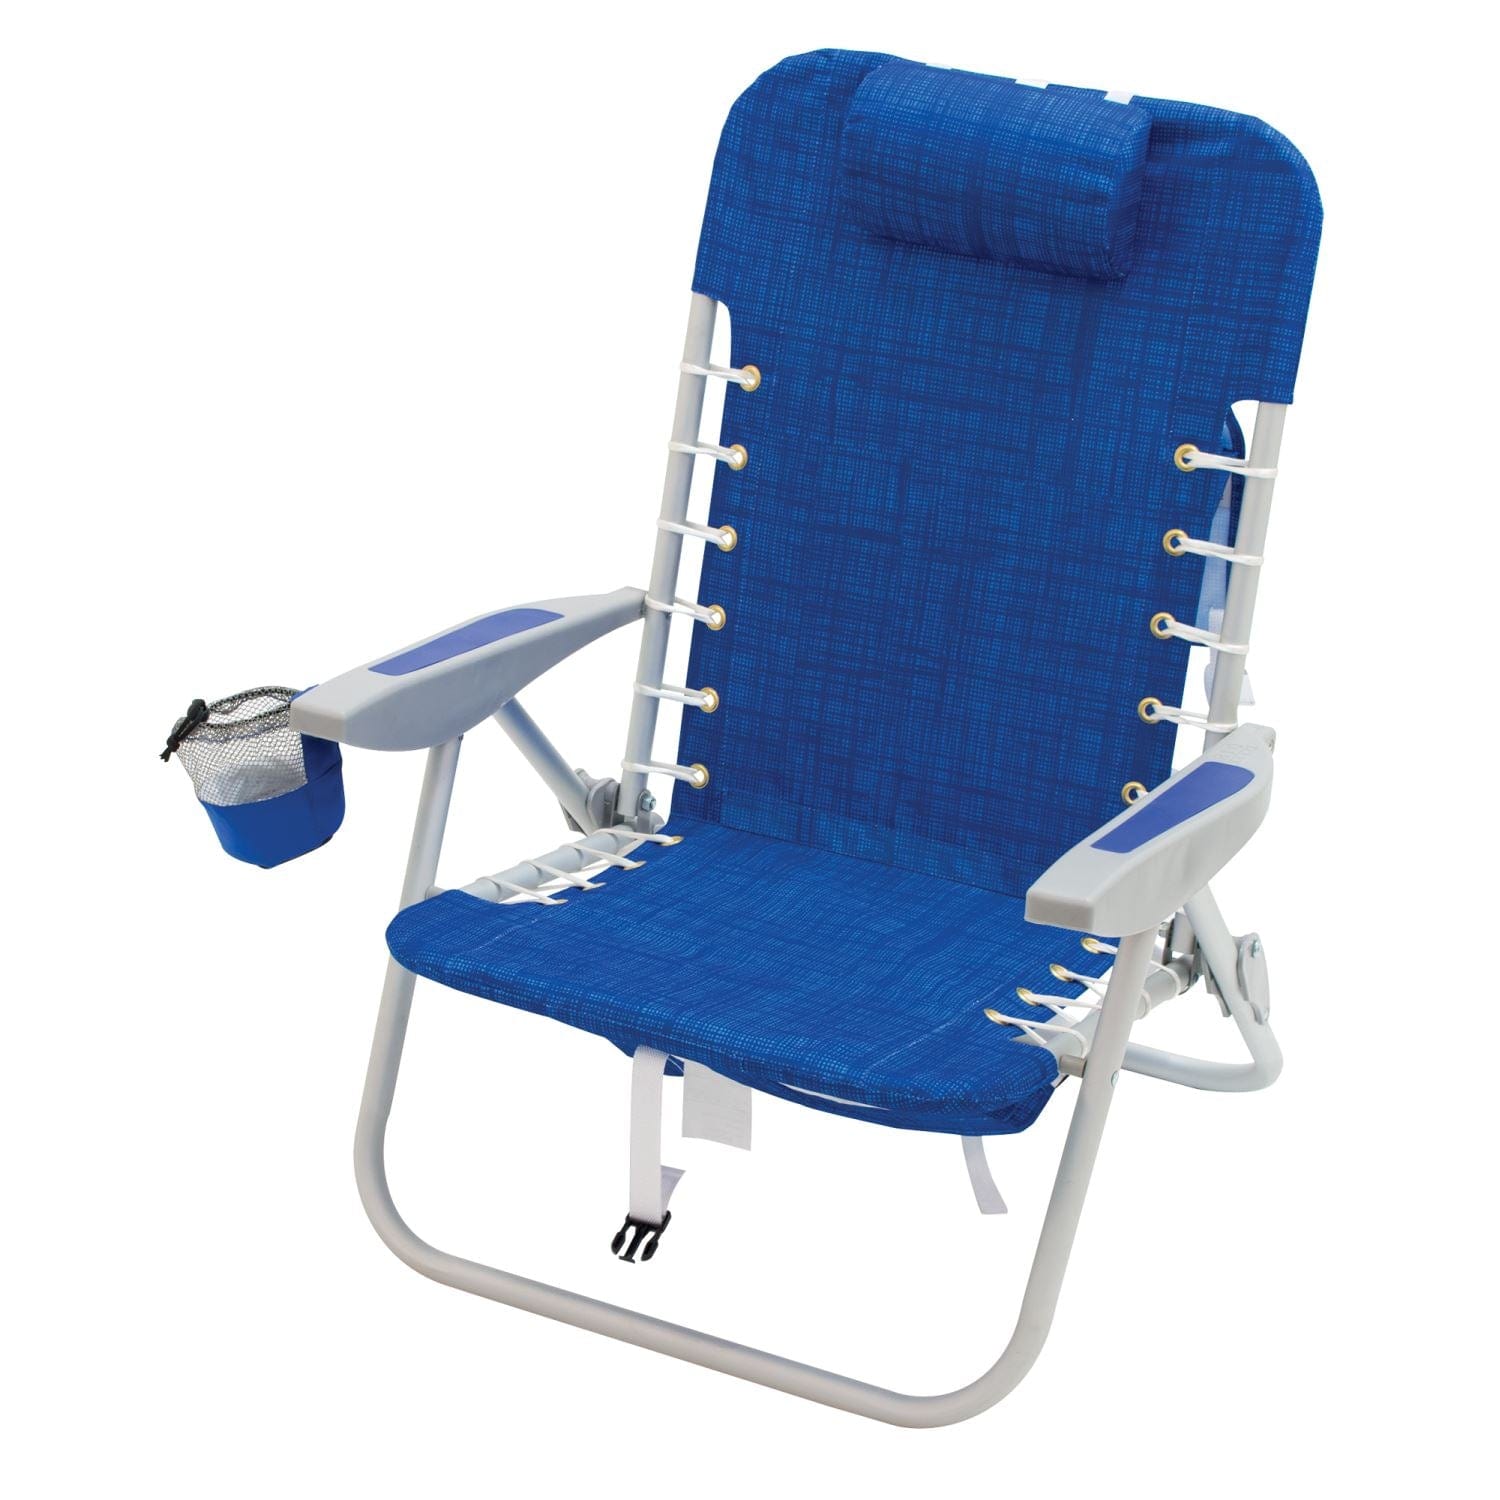 The Fulfiller Backpack chair RIO Gear | 4-Position Lace-Up Backpack Chair - Blue SC529-1913-1